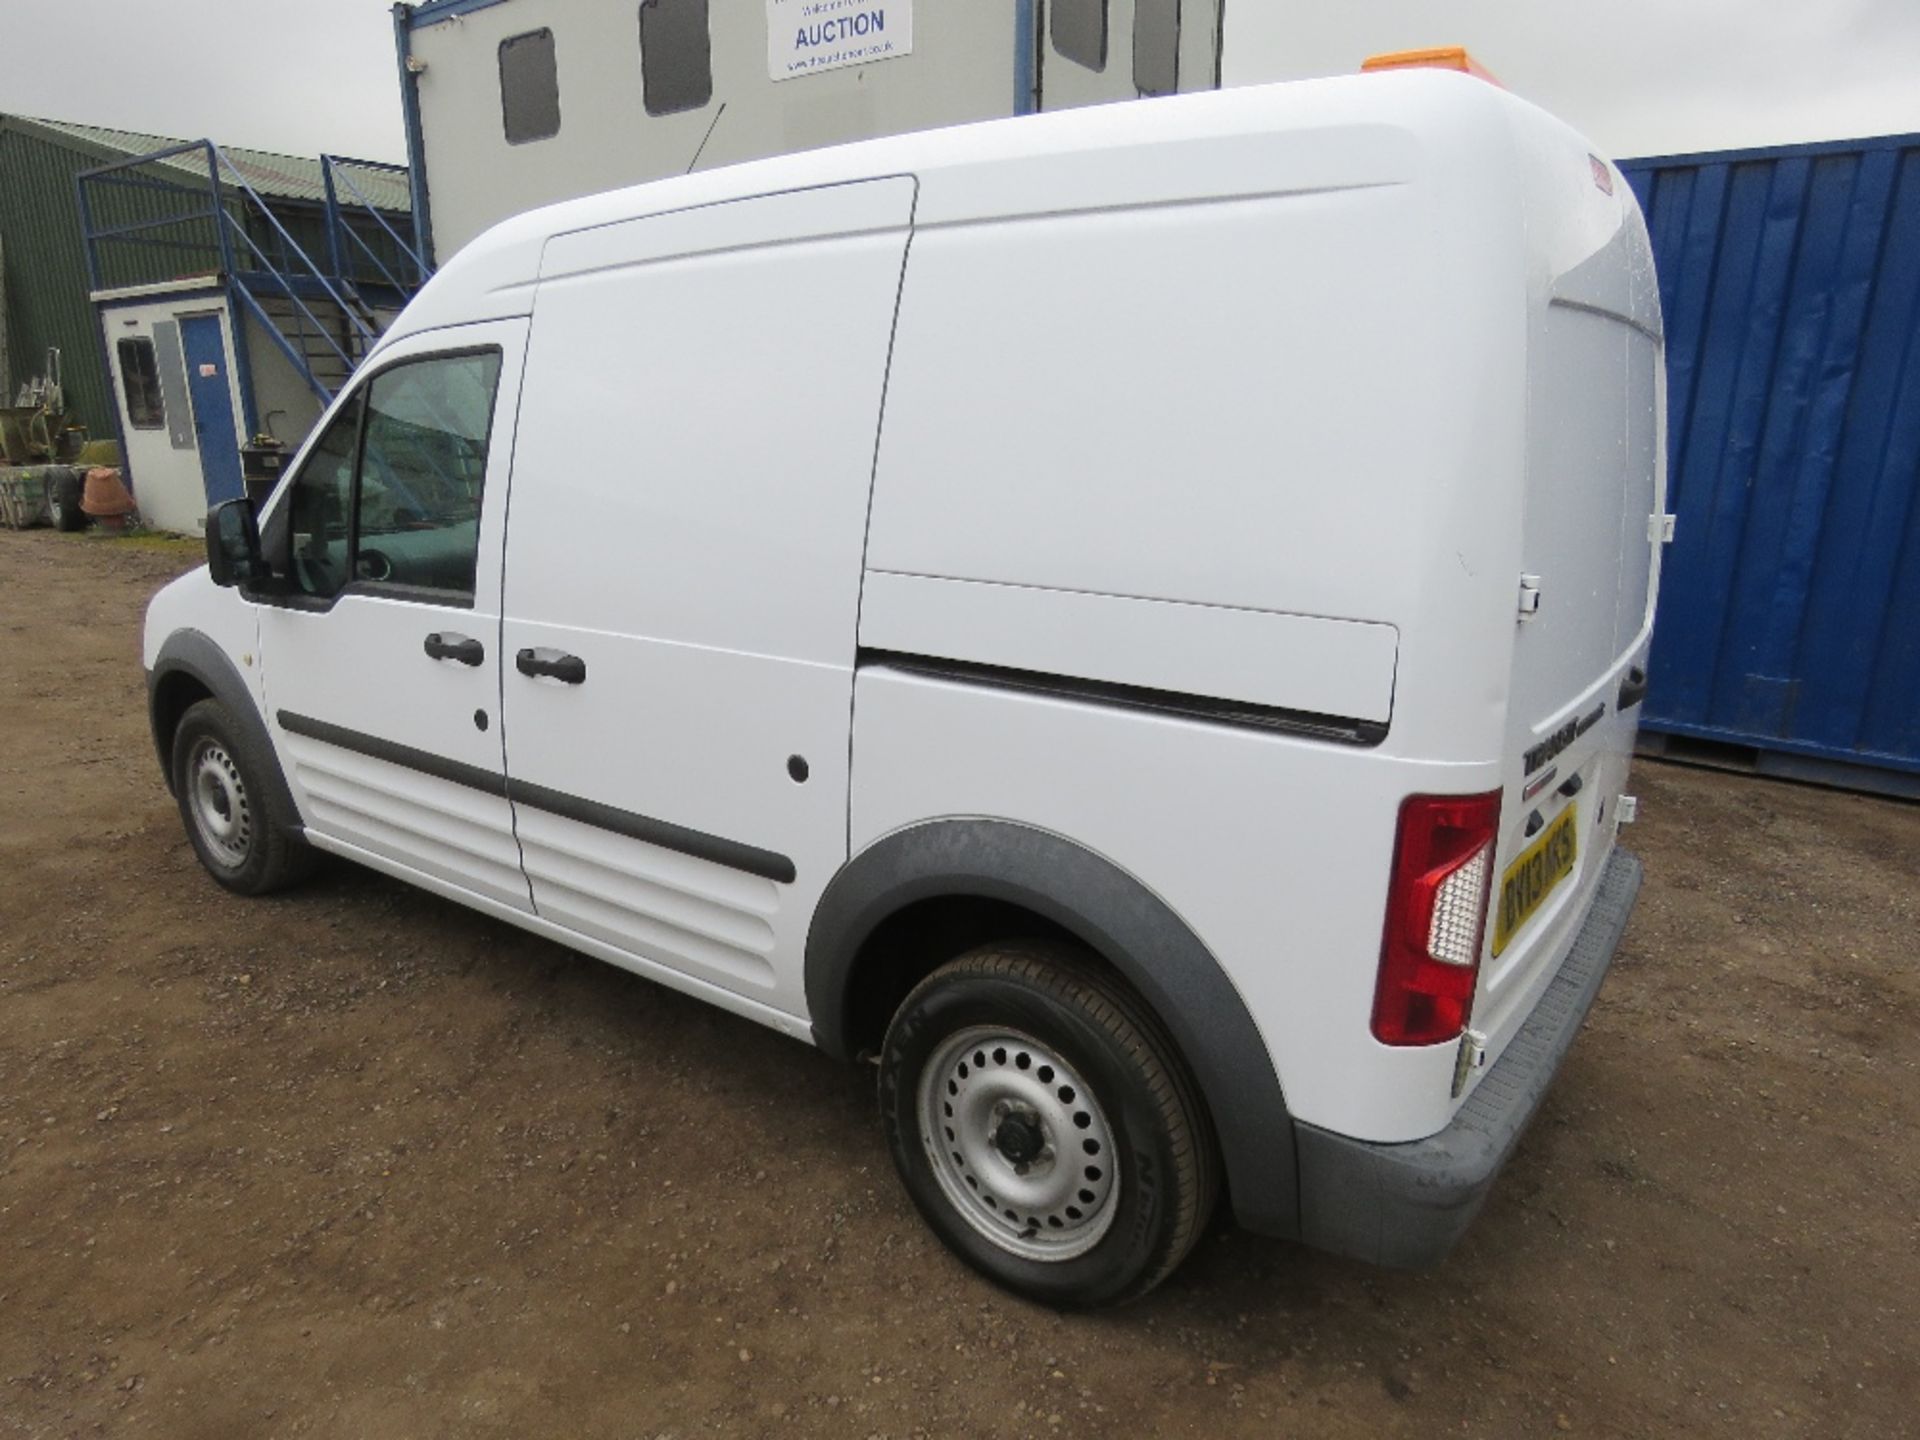 FORD TRANSIT CONNECT PANEL VAN REG:BV13 NKS 1.8LITRE. HIGH ROOF LWB. 83K REC MILES APPROX. WITH V5 A - Image 17 of 26